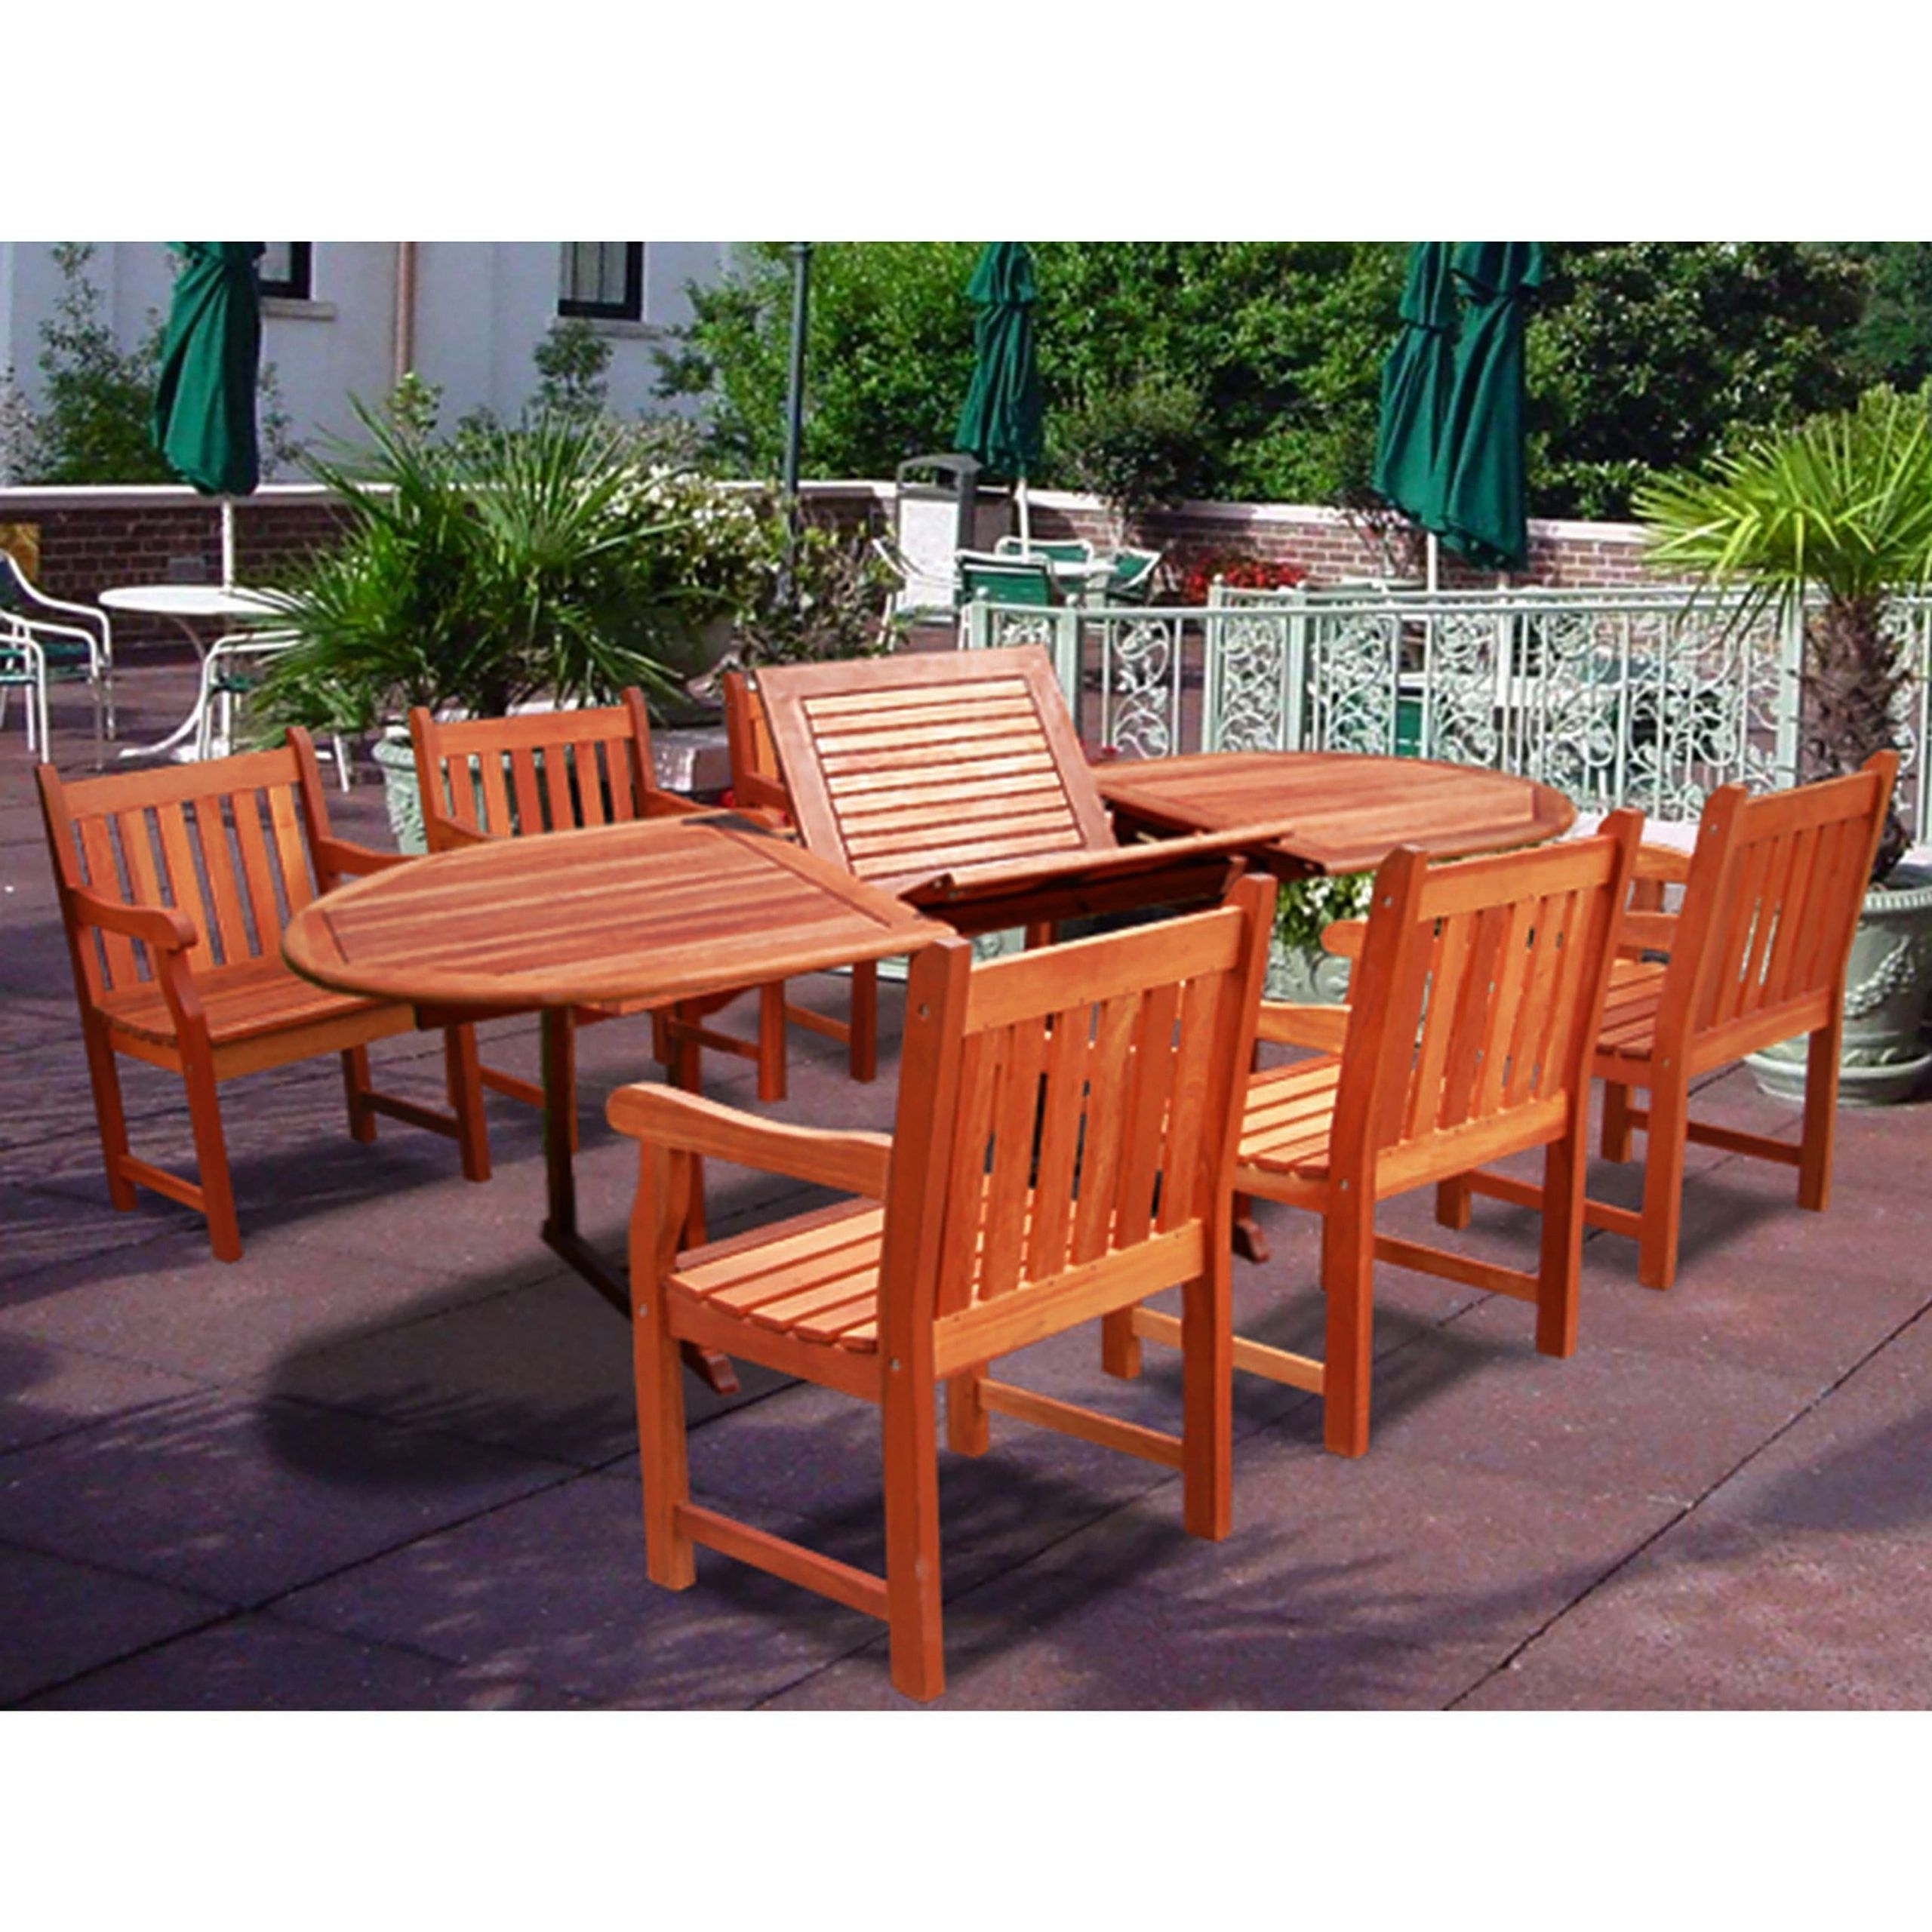 Widely Used Oval 7 Piece Outdoor Patio Dining Sets Pertaining To Shop Hardwood Oval Extension Table And Armchair 7 Piece Outdoor Dining (View 2 of 15)